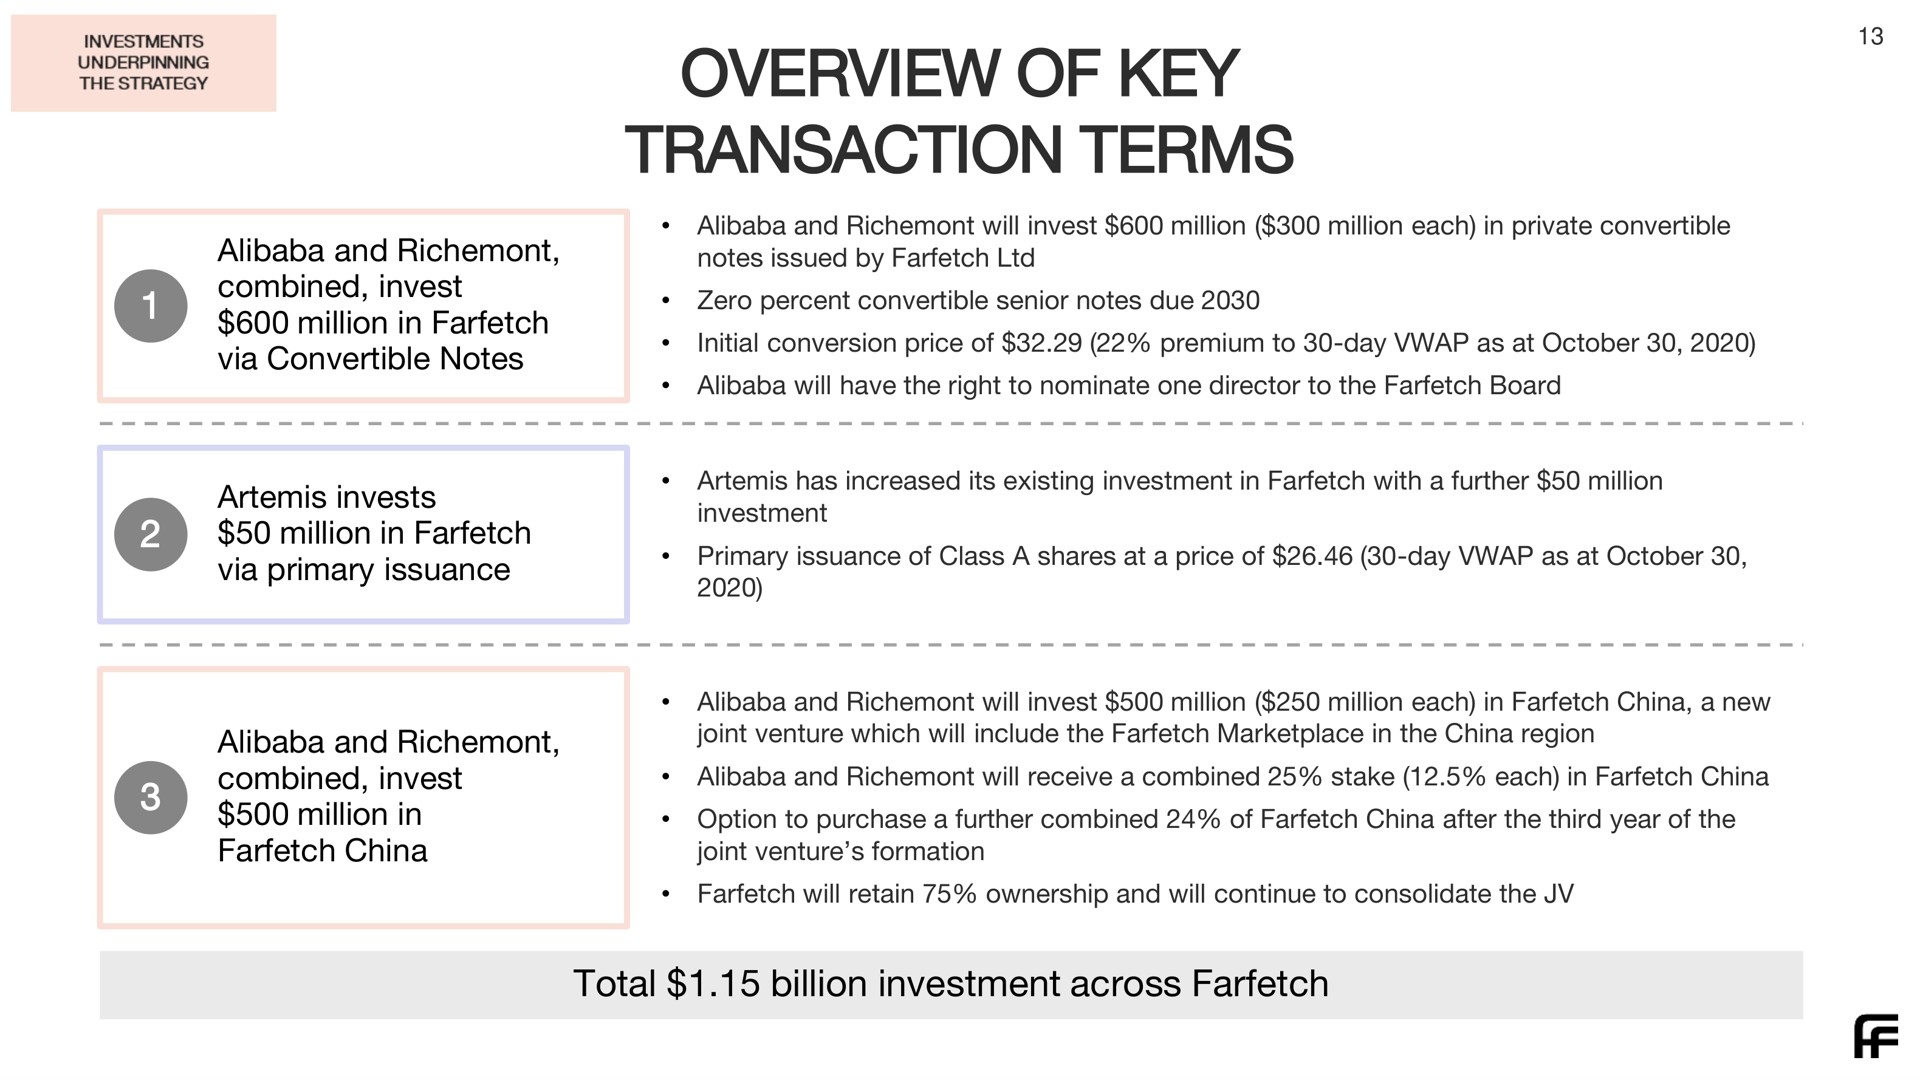 overview of key transaction terms | Farfetch